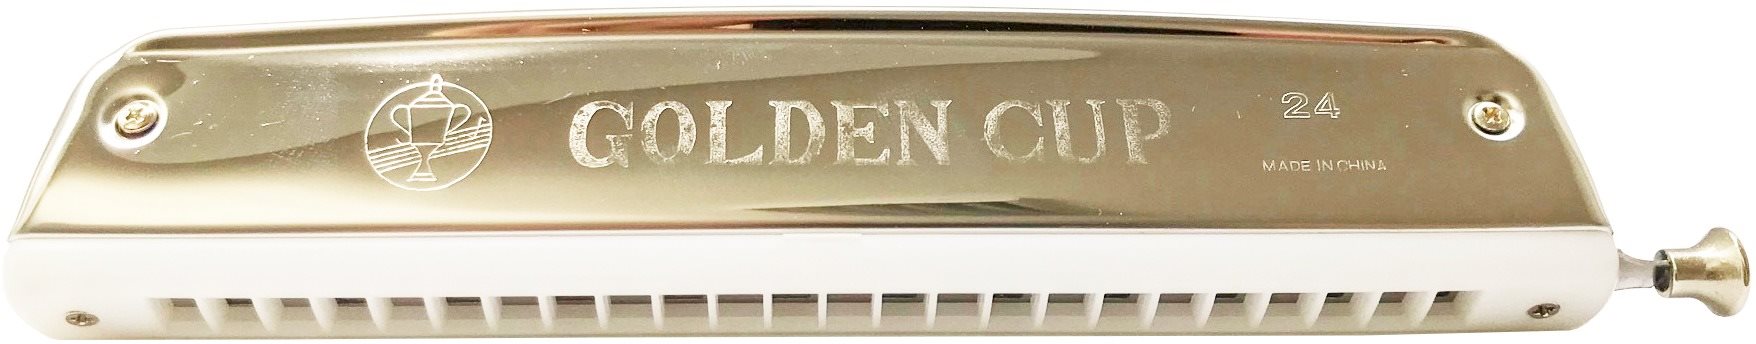 GOLDEN CUP JH 024 CHC